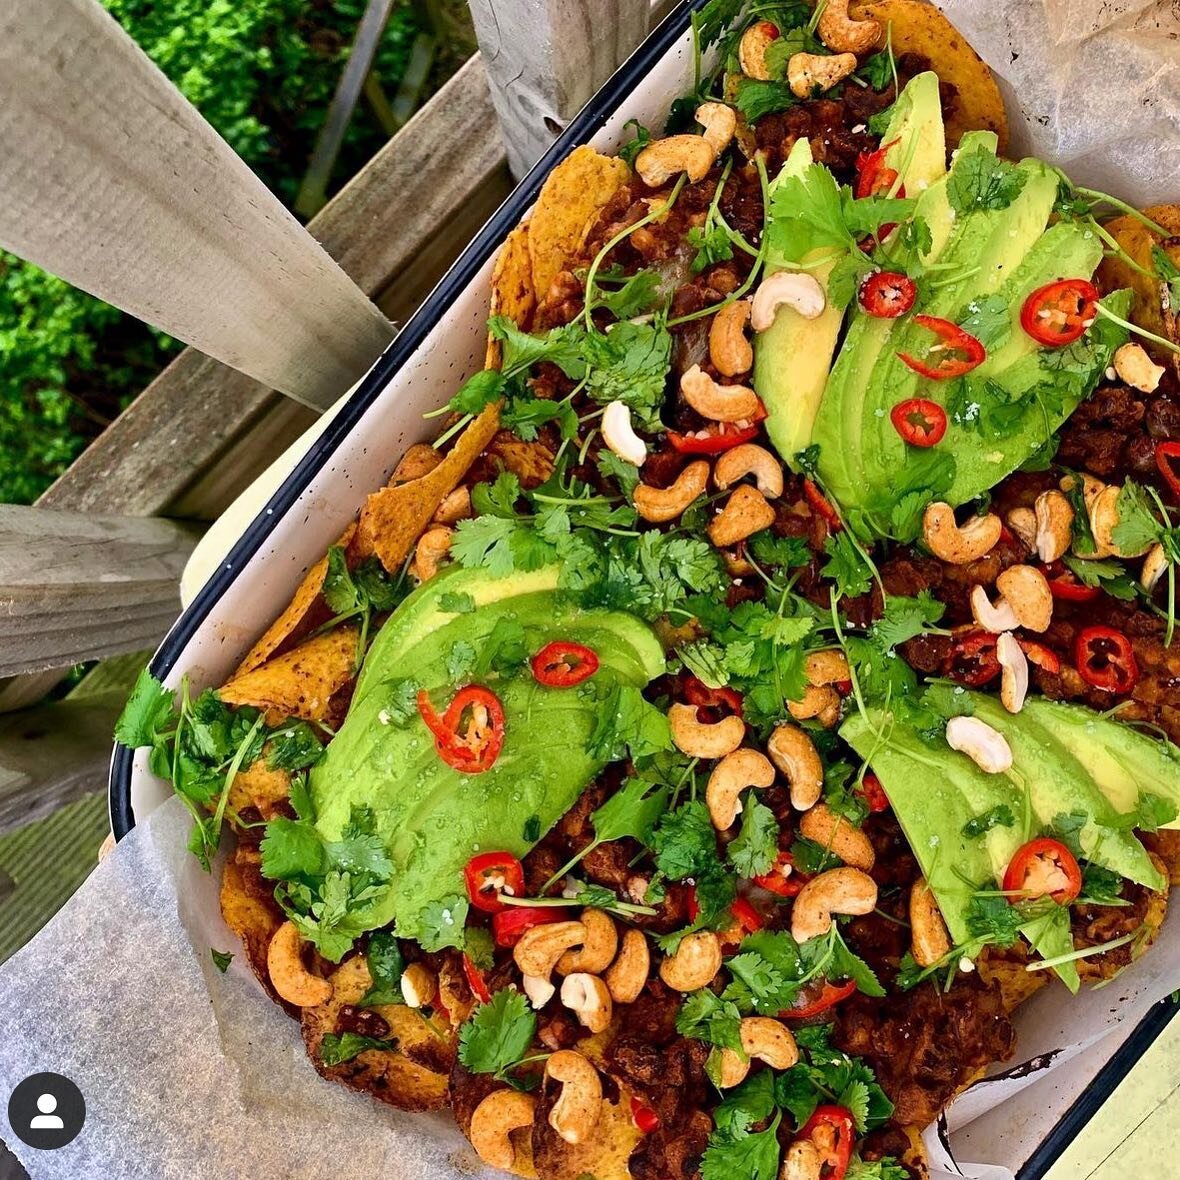 Check out these delicious vege Nachos. How tasty do they look! @tastings_bysophia has the recipe posted if anyone is interested in recreating 
#cornchips #nzmade #mexicano #nachos #vegetarianrecipes